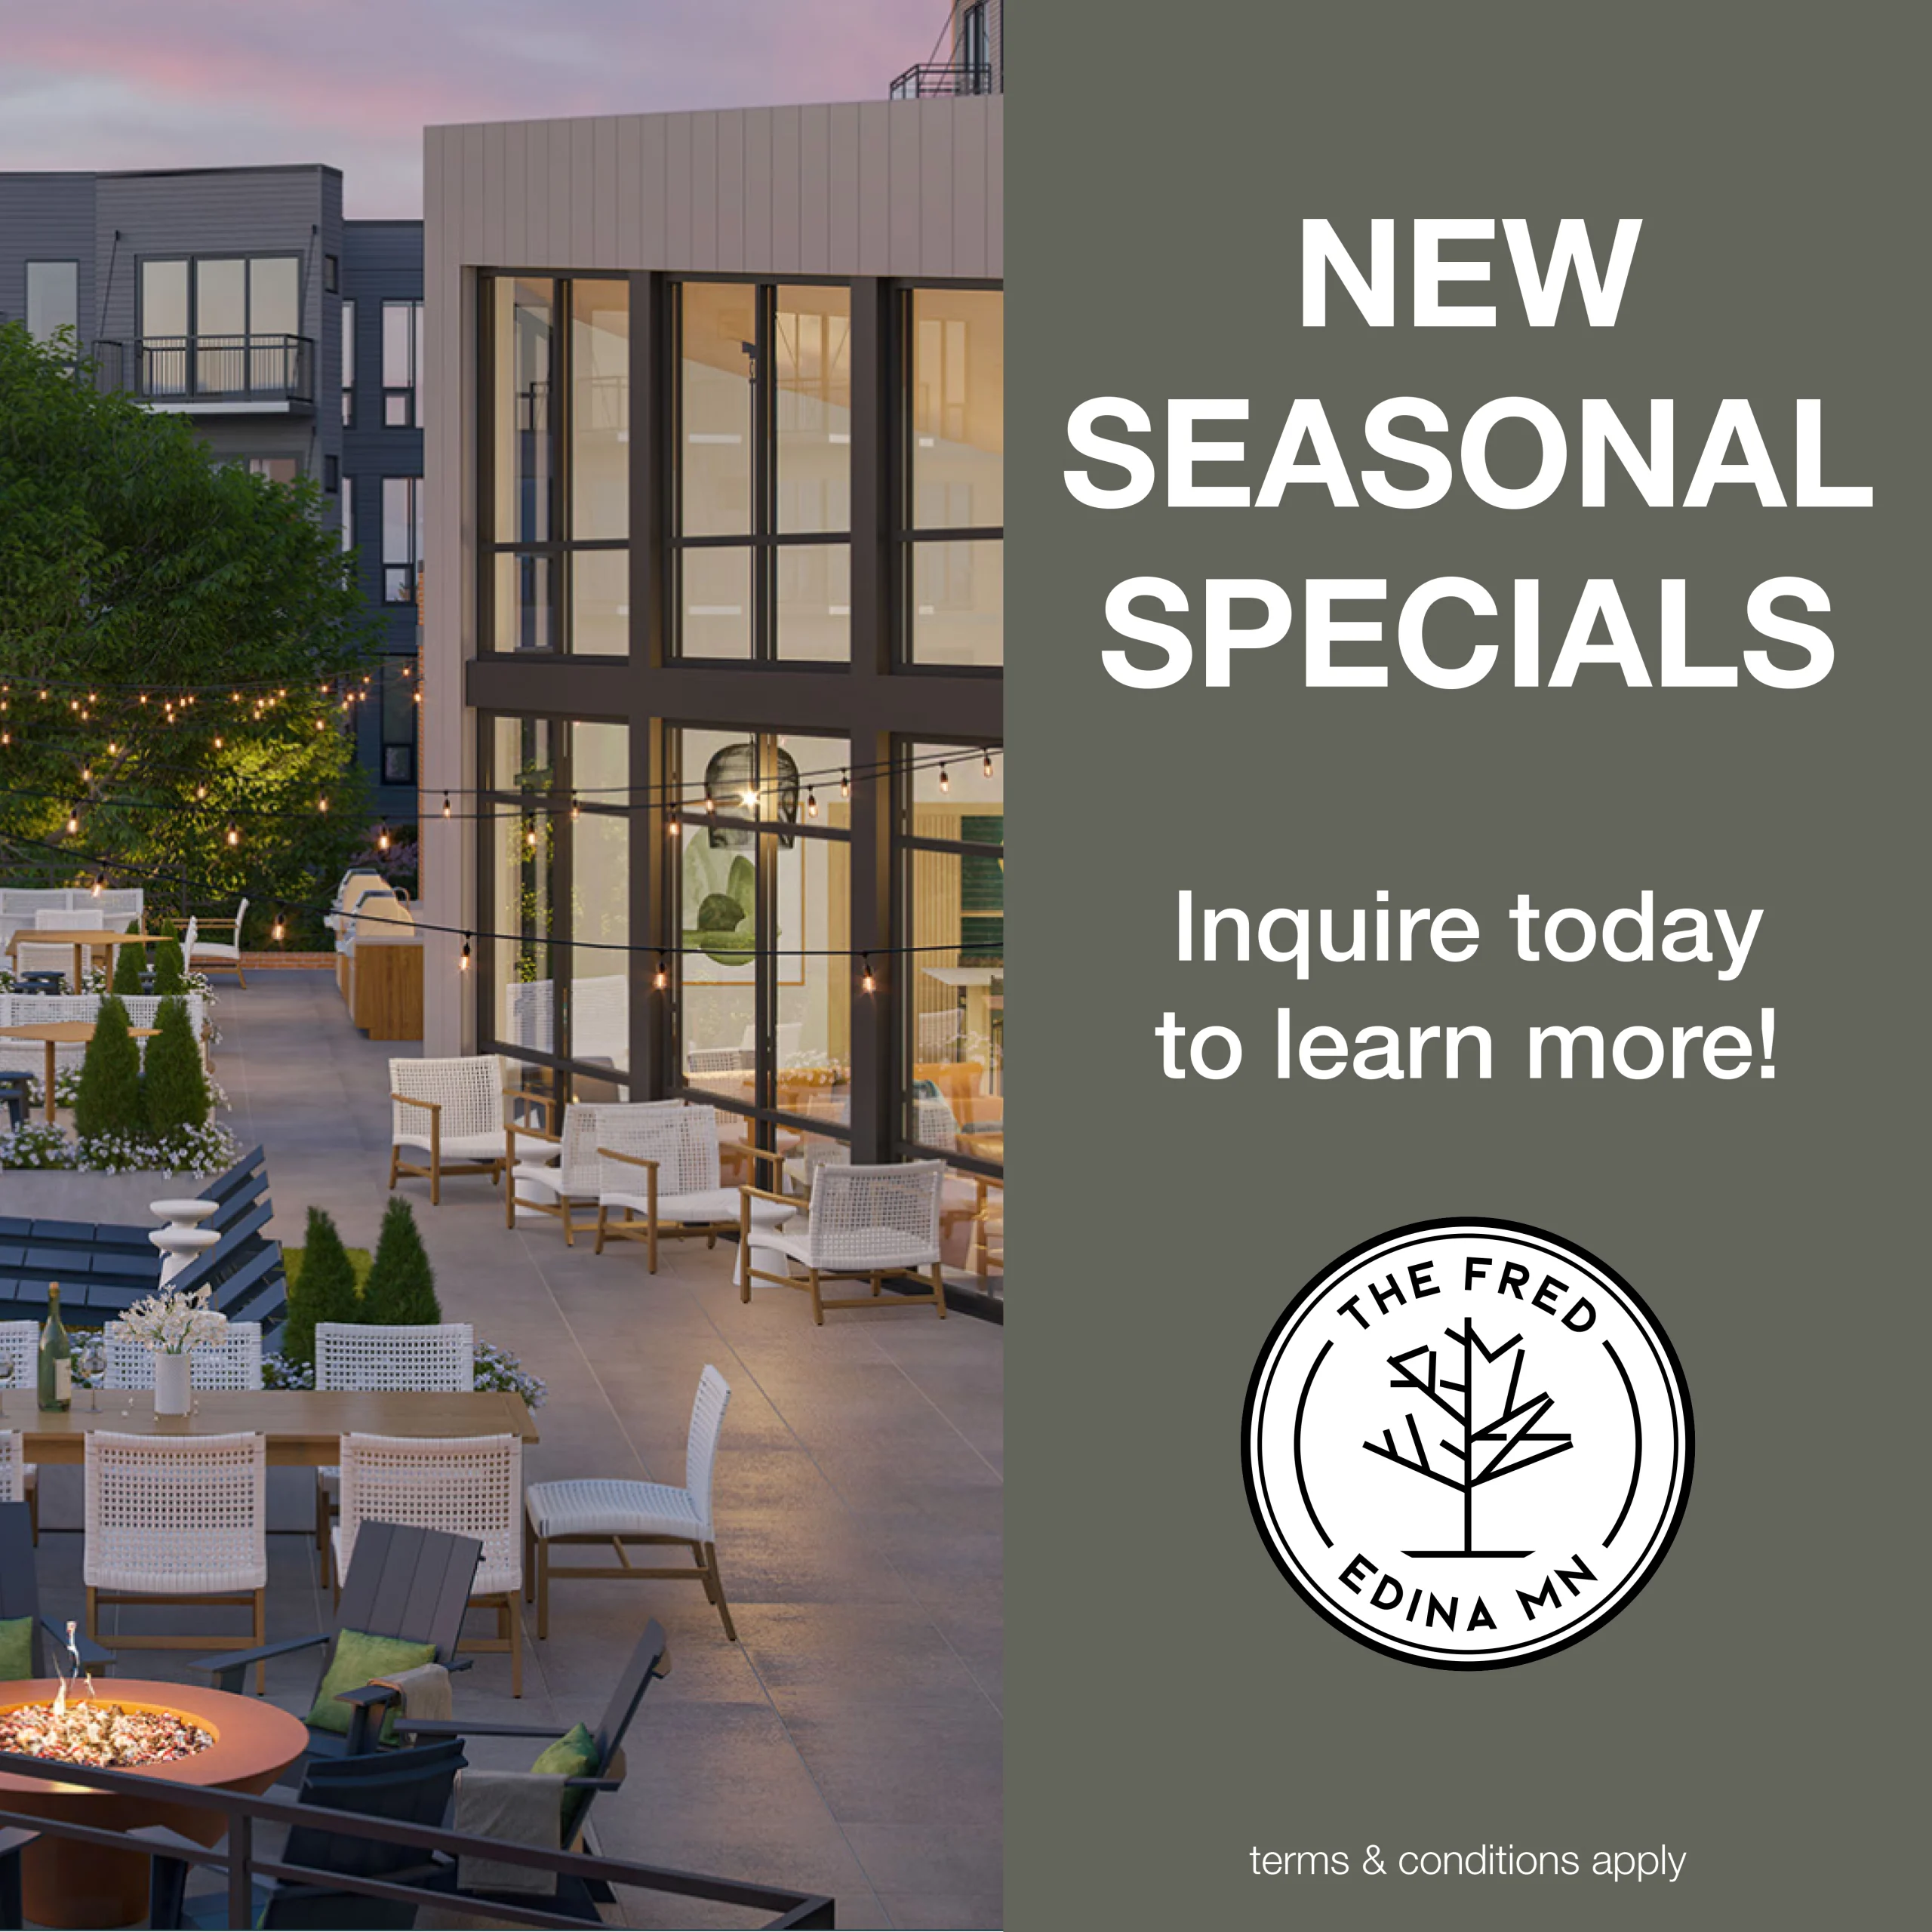 New Seasonal Specials! Inquire today to learn more! Terms & conditions apply.